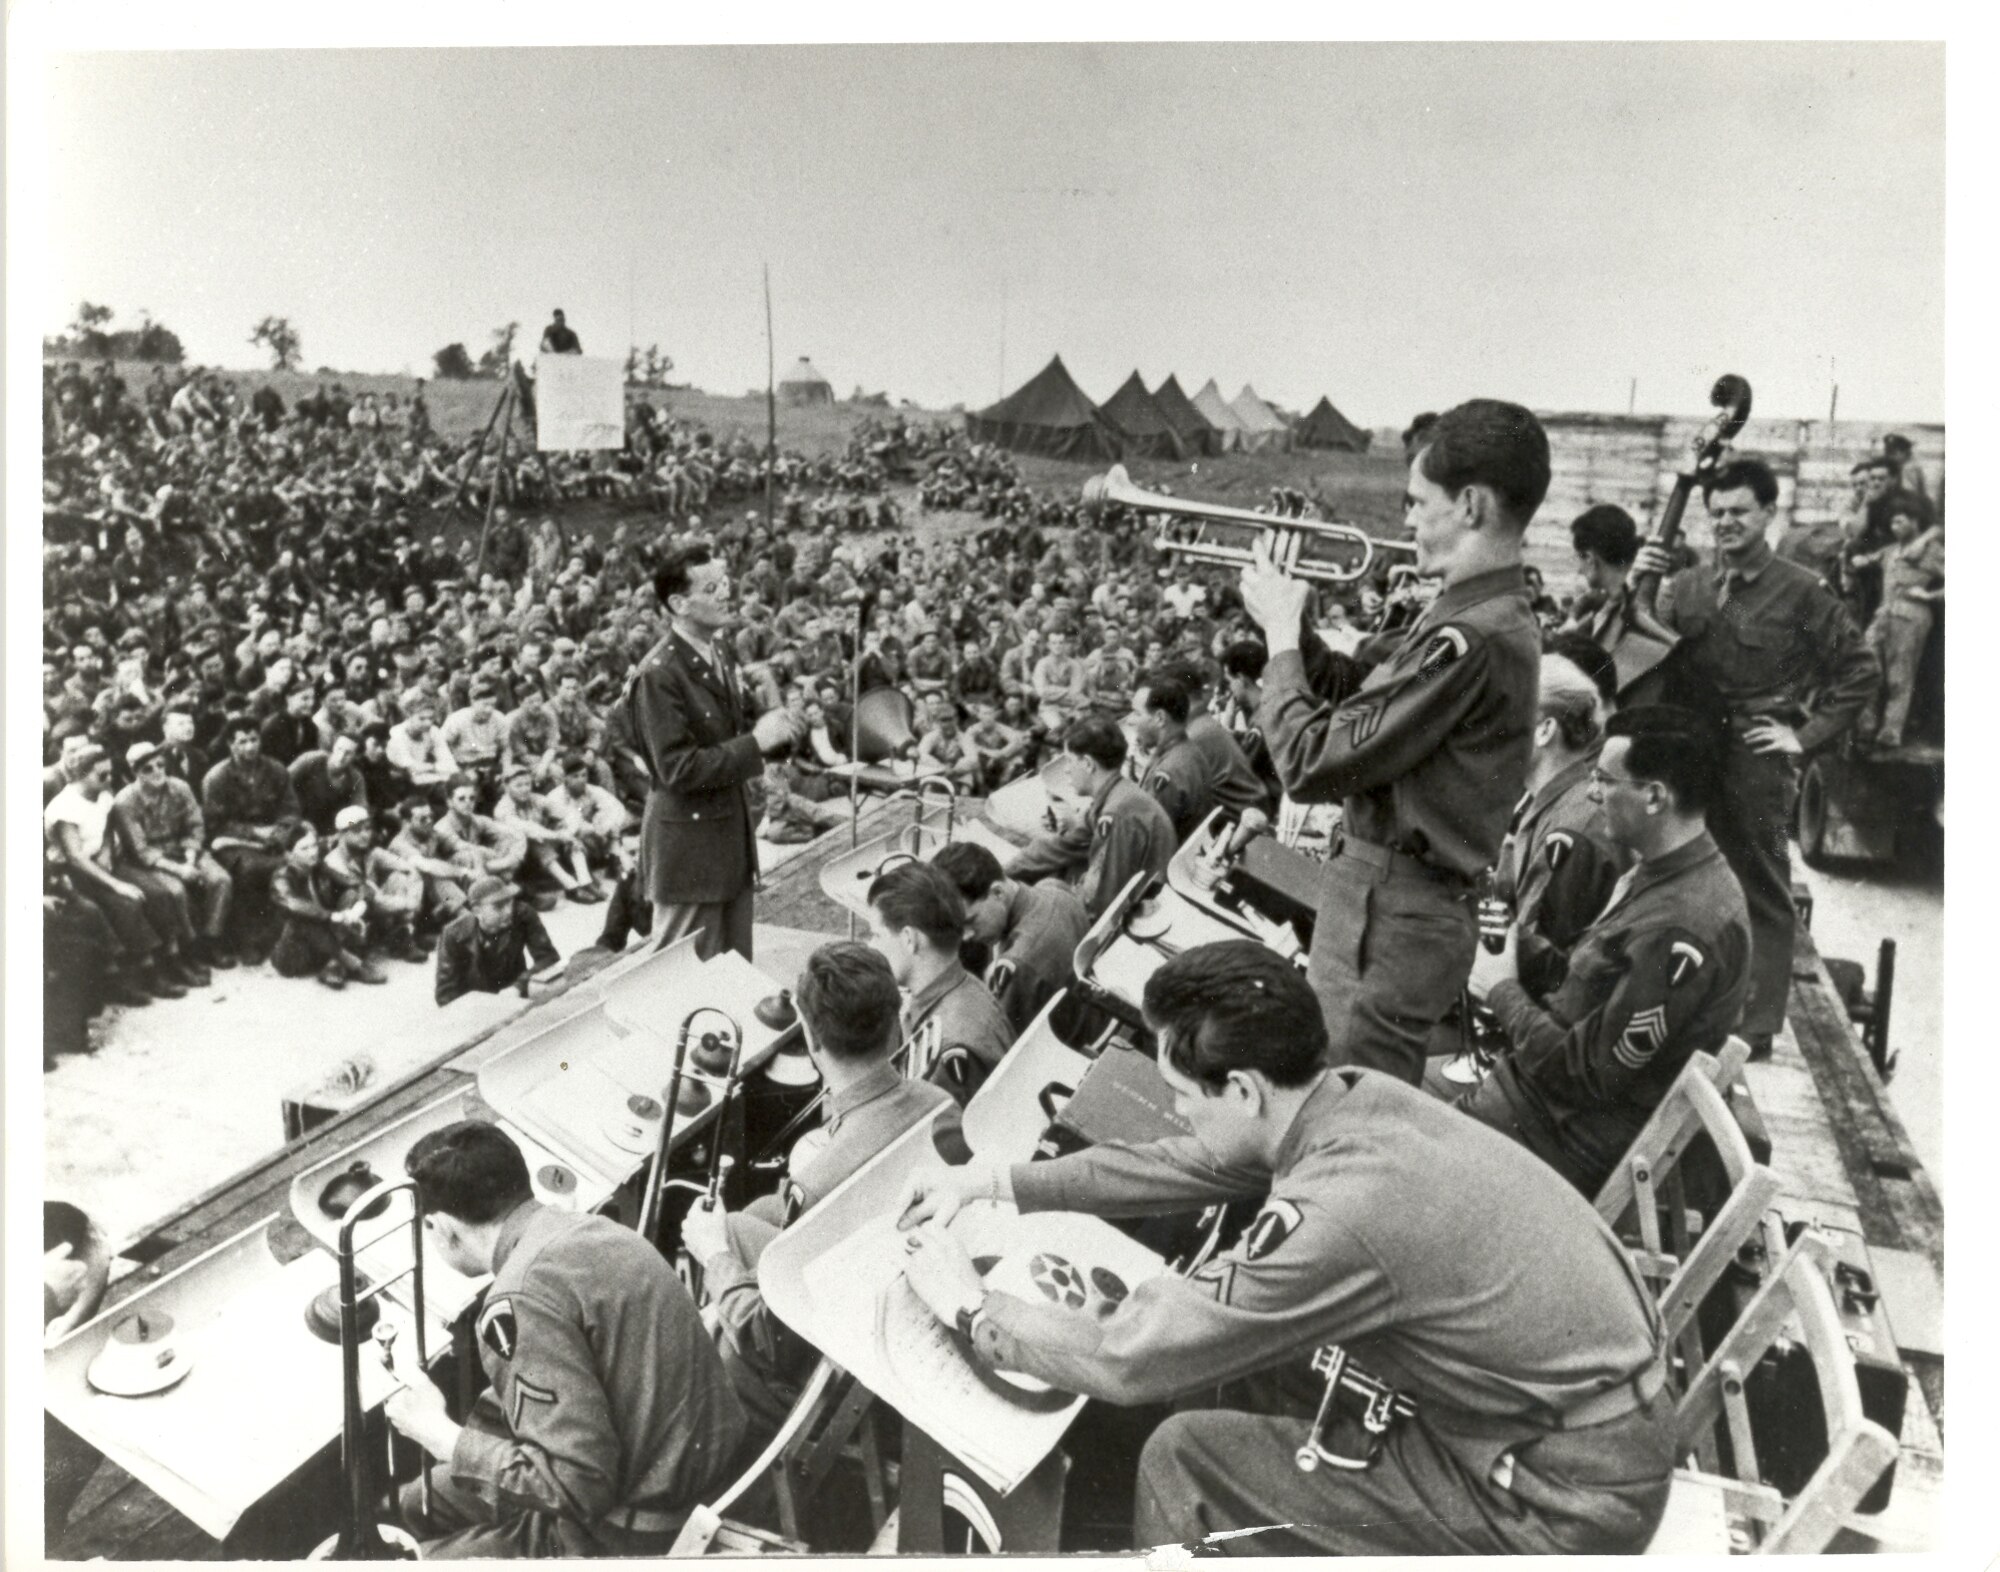 Glenn Miller’s band plays for US and Allied troops in England, Jun-Dec 1944. The band gave 300 live performances in England and 500 radio broadcasts to Allied troops on the continent. (Courtesy Air Force photo by Air University History Office/cleared)